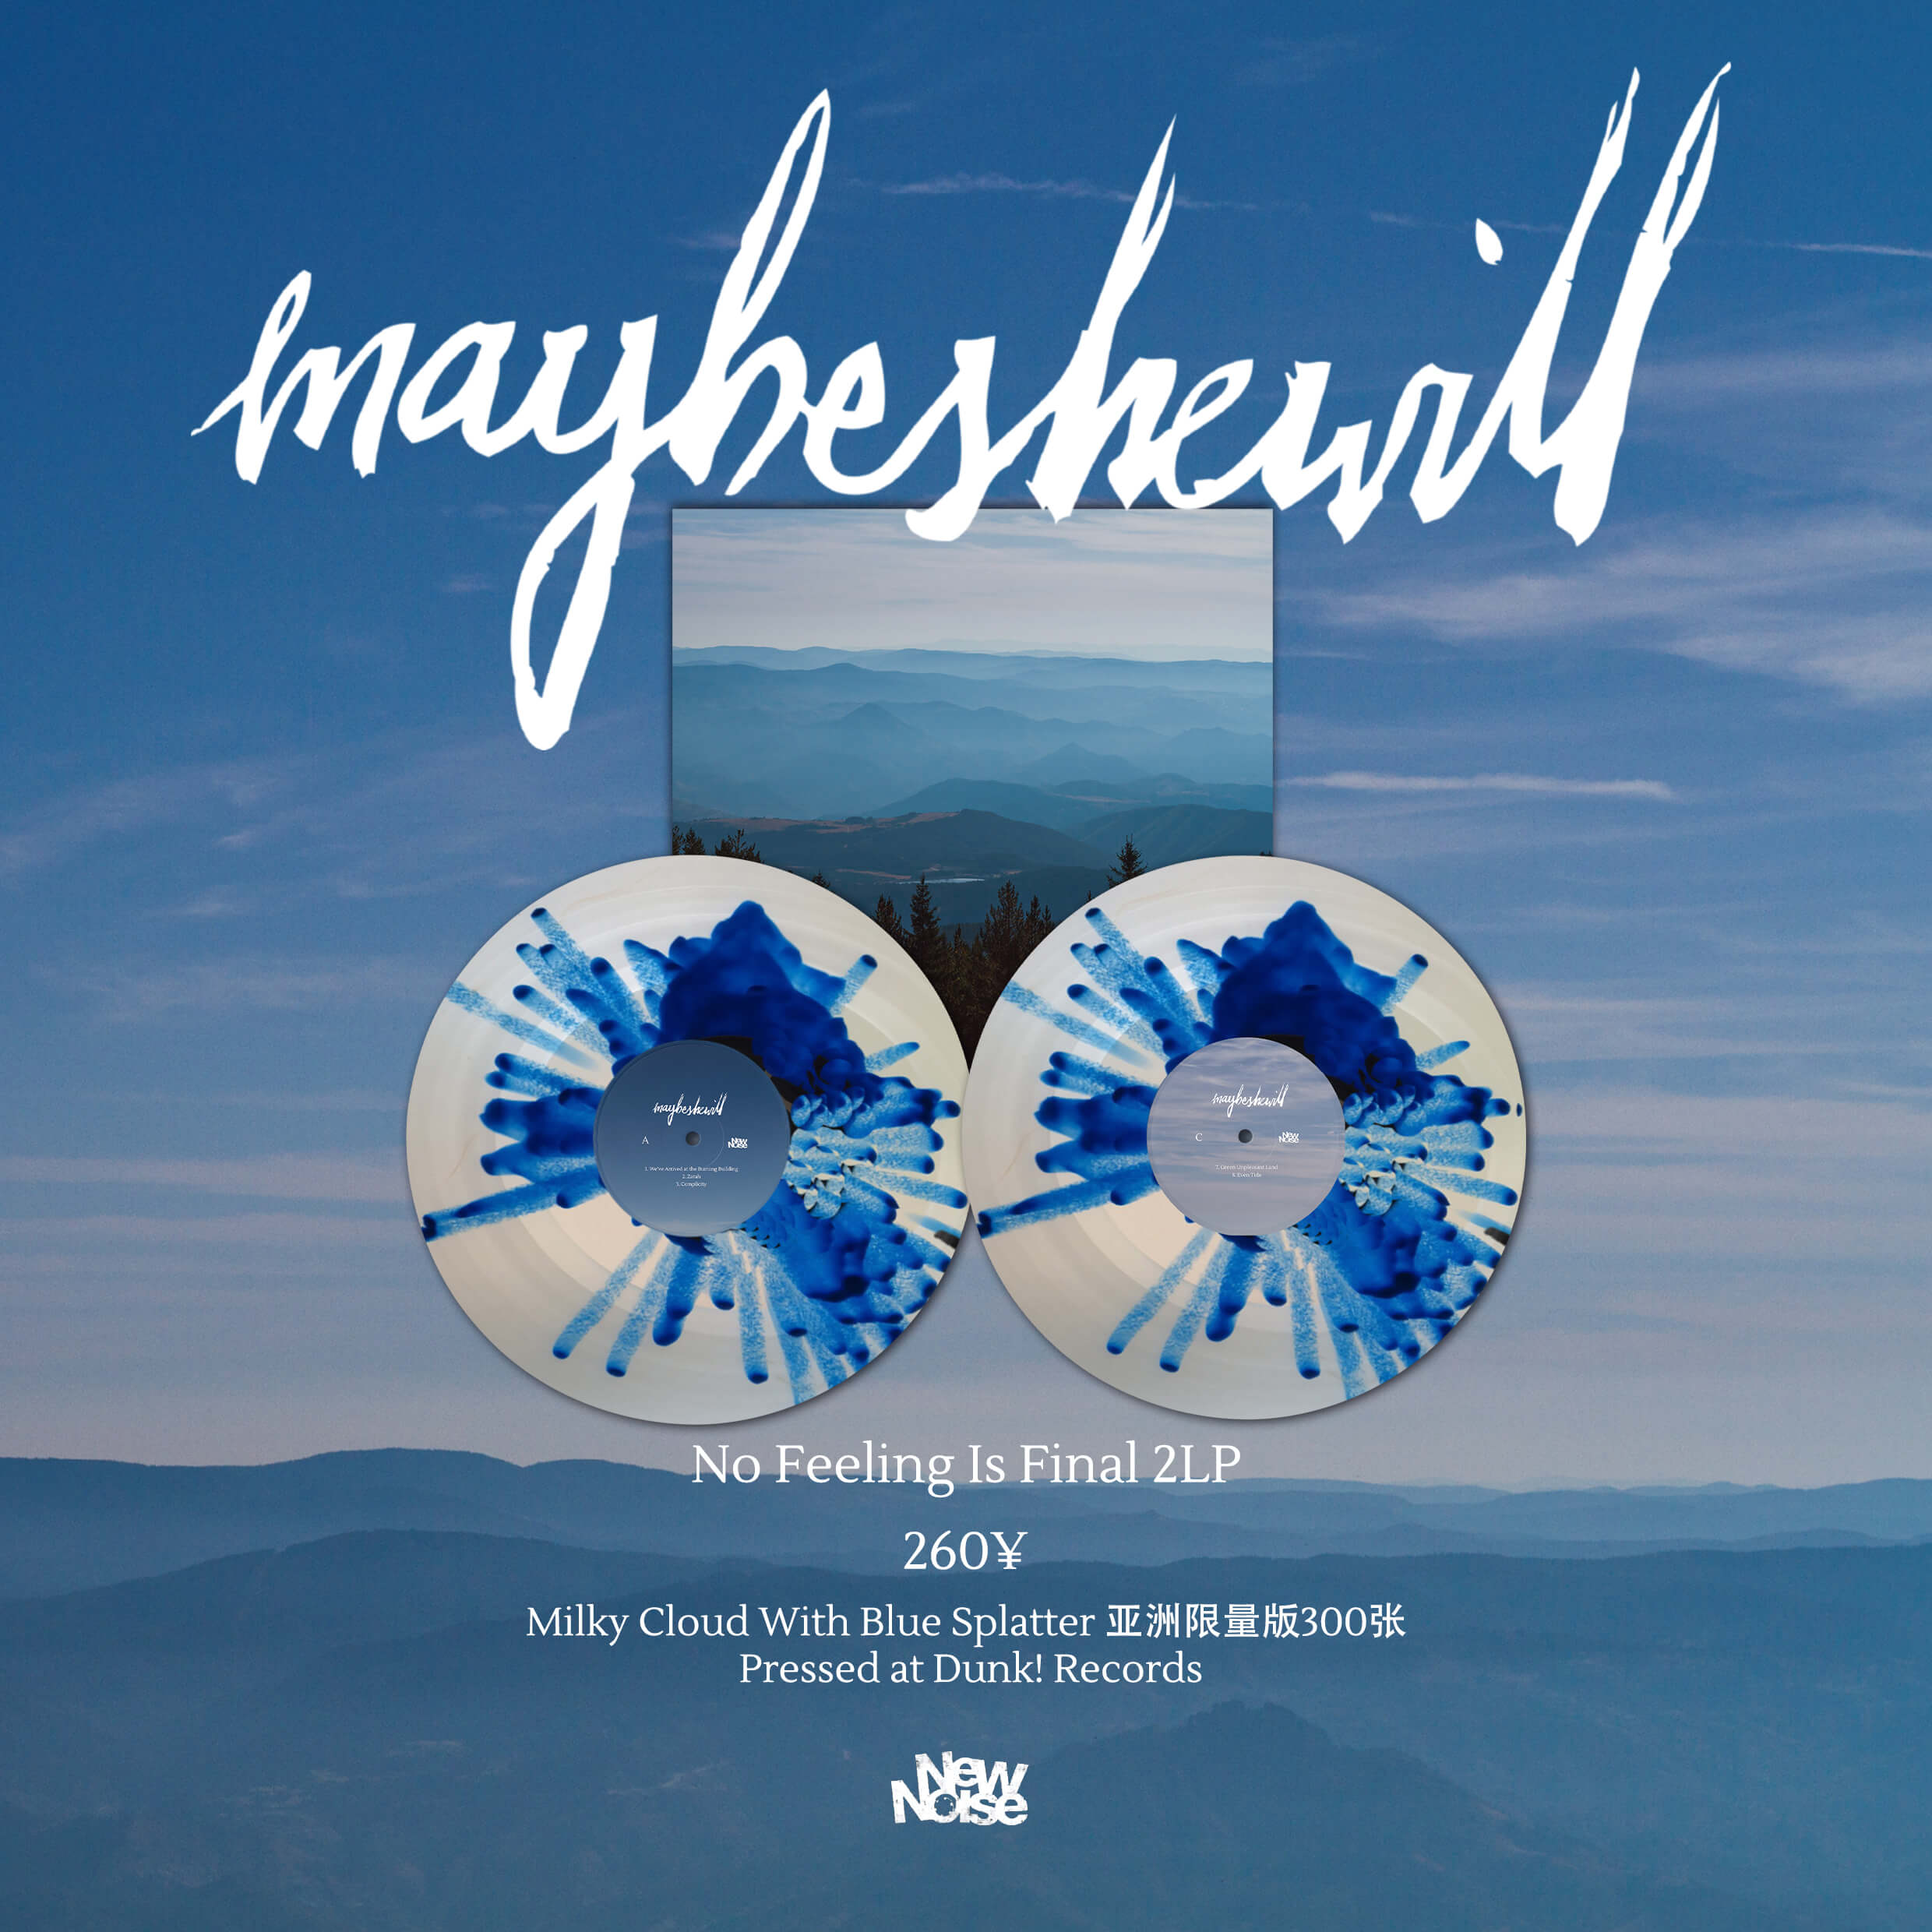 Maybeshewill - No Feeling Is Final  2LP 彩胶